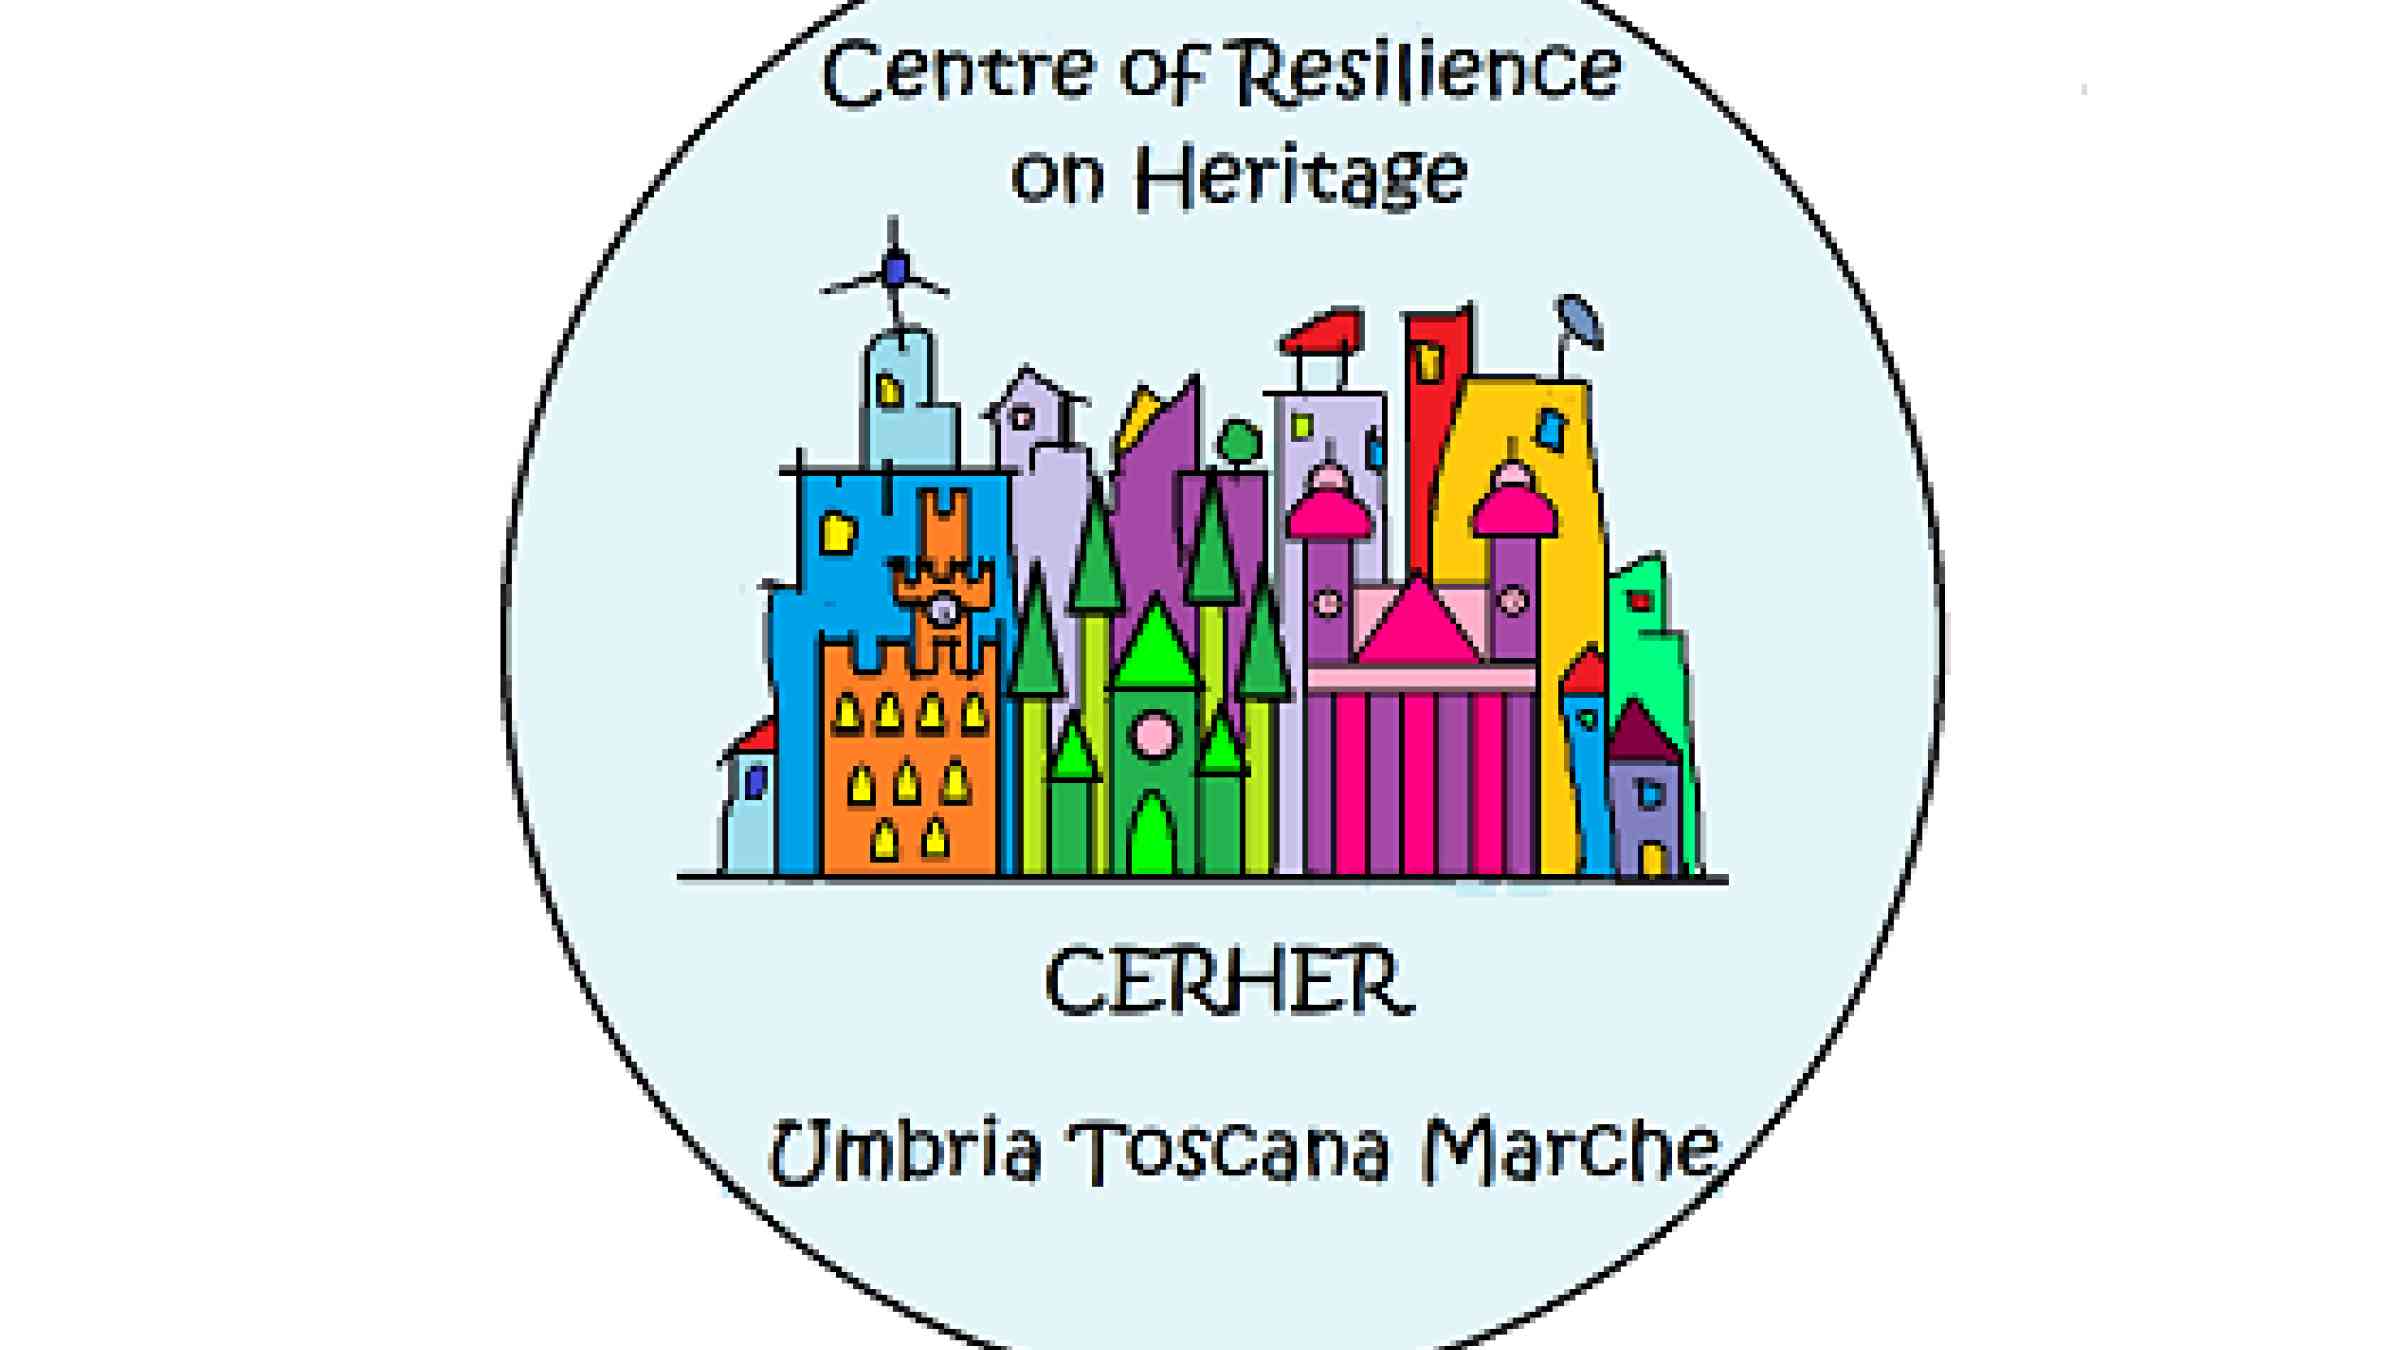 Centre of Resilience on Heritage (CERHER) logo